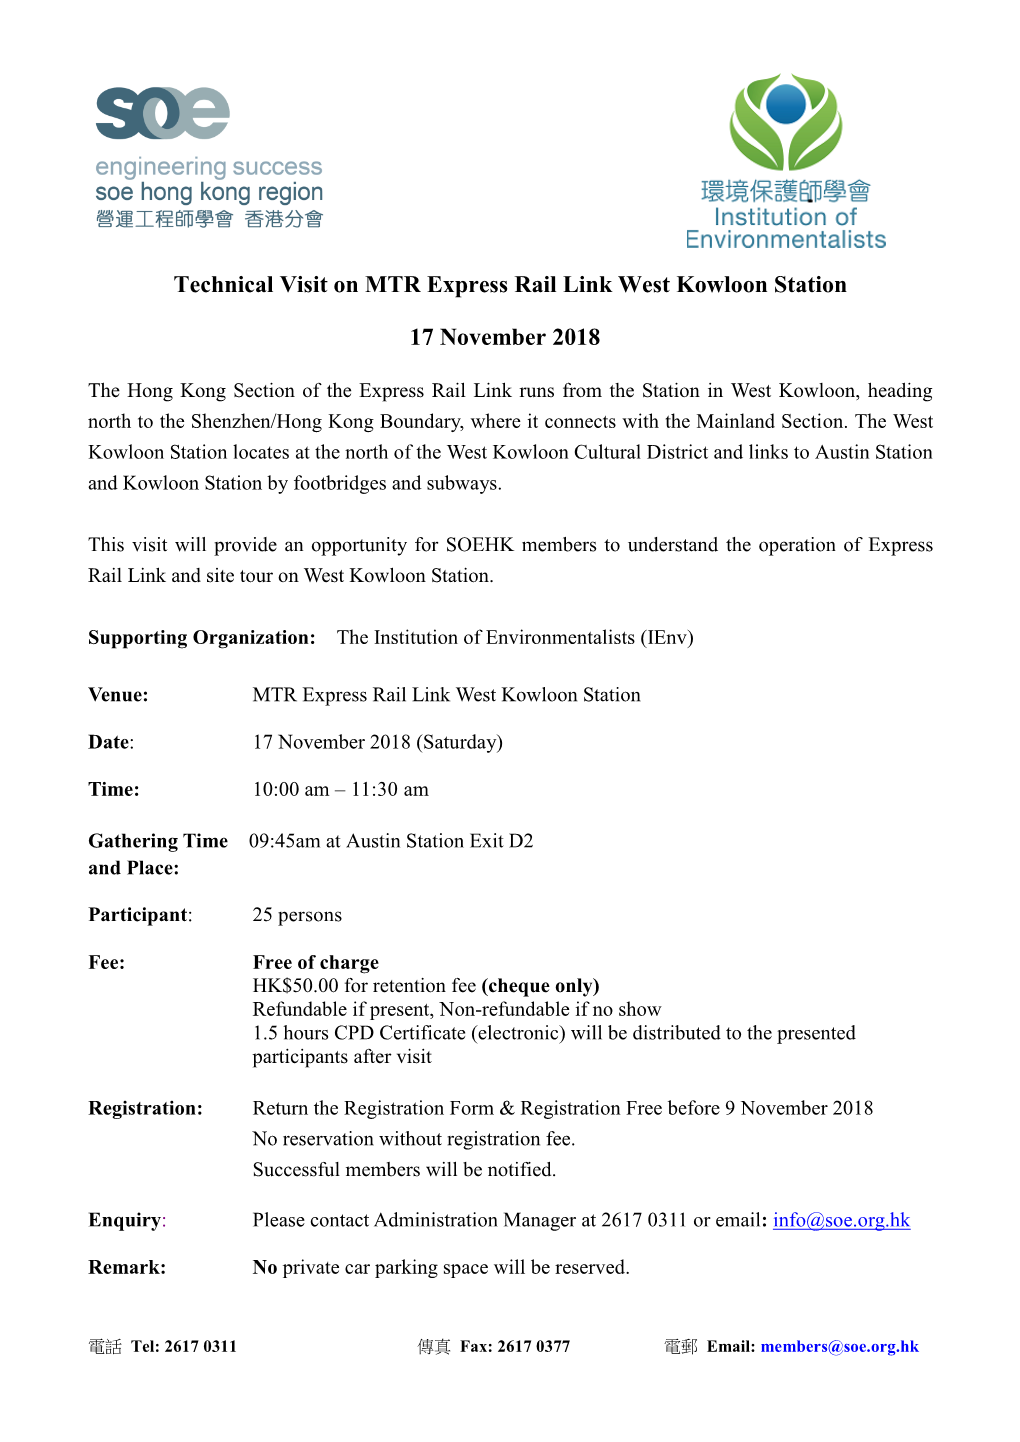 Technical Visit on MTR Express Rail Link West Kowloon Station 17